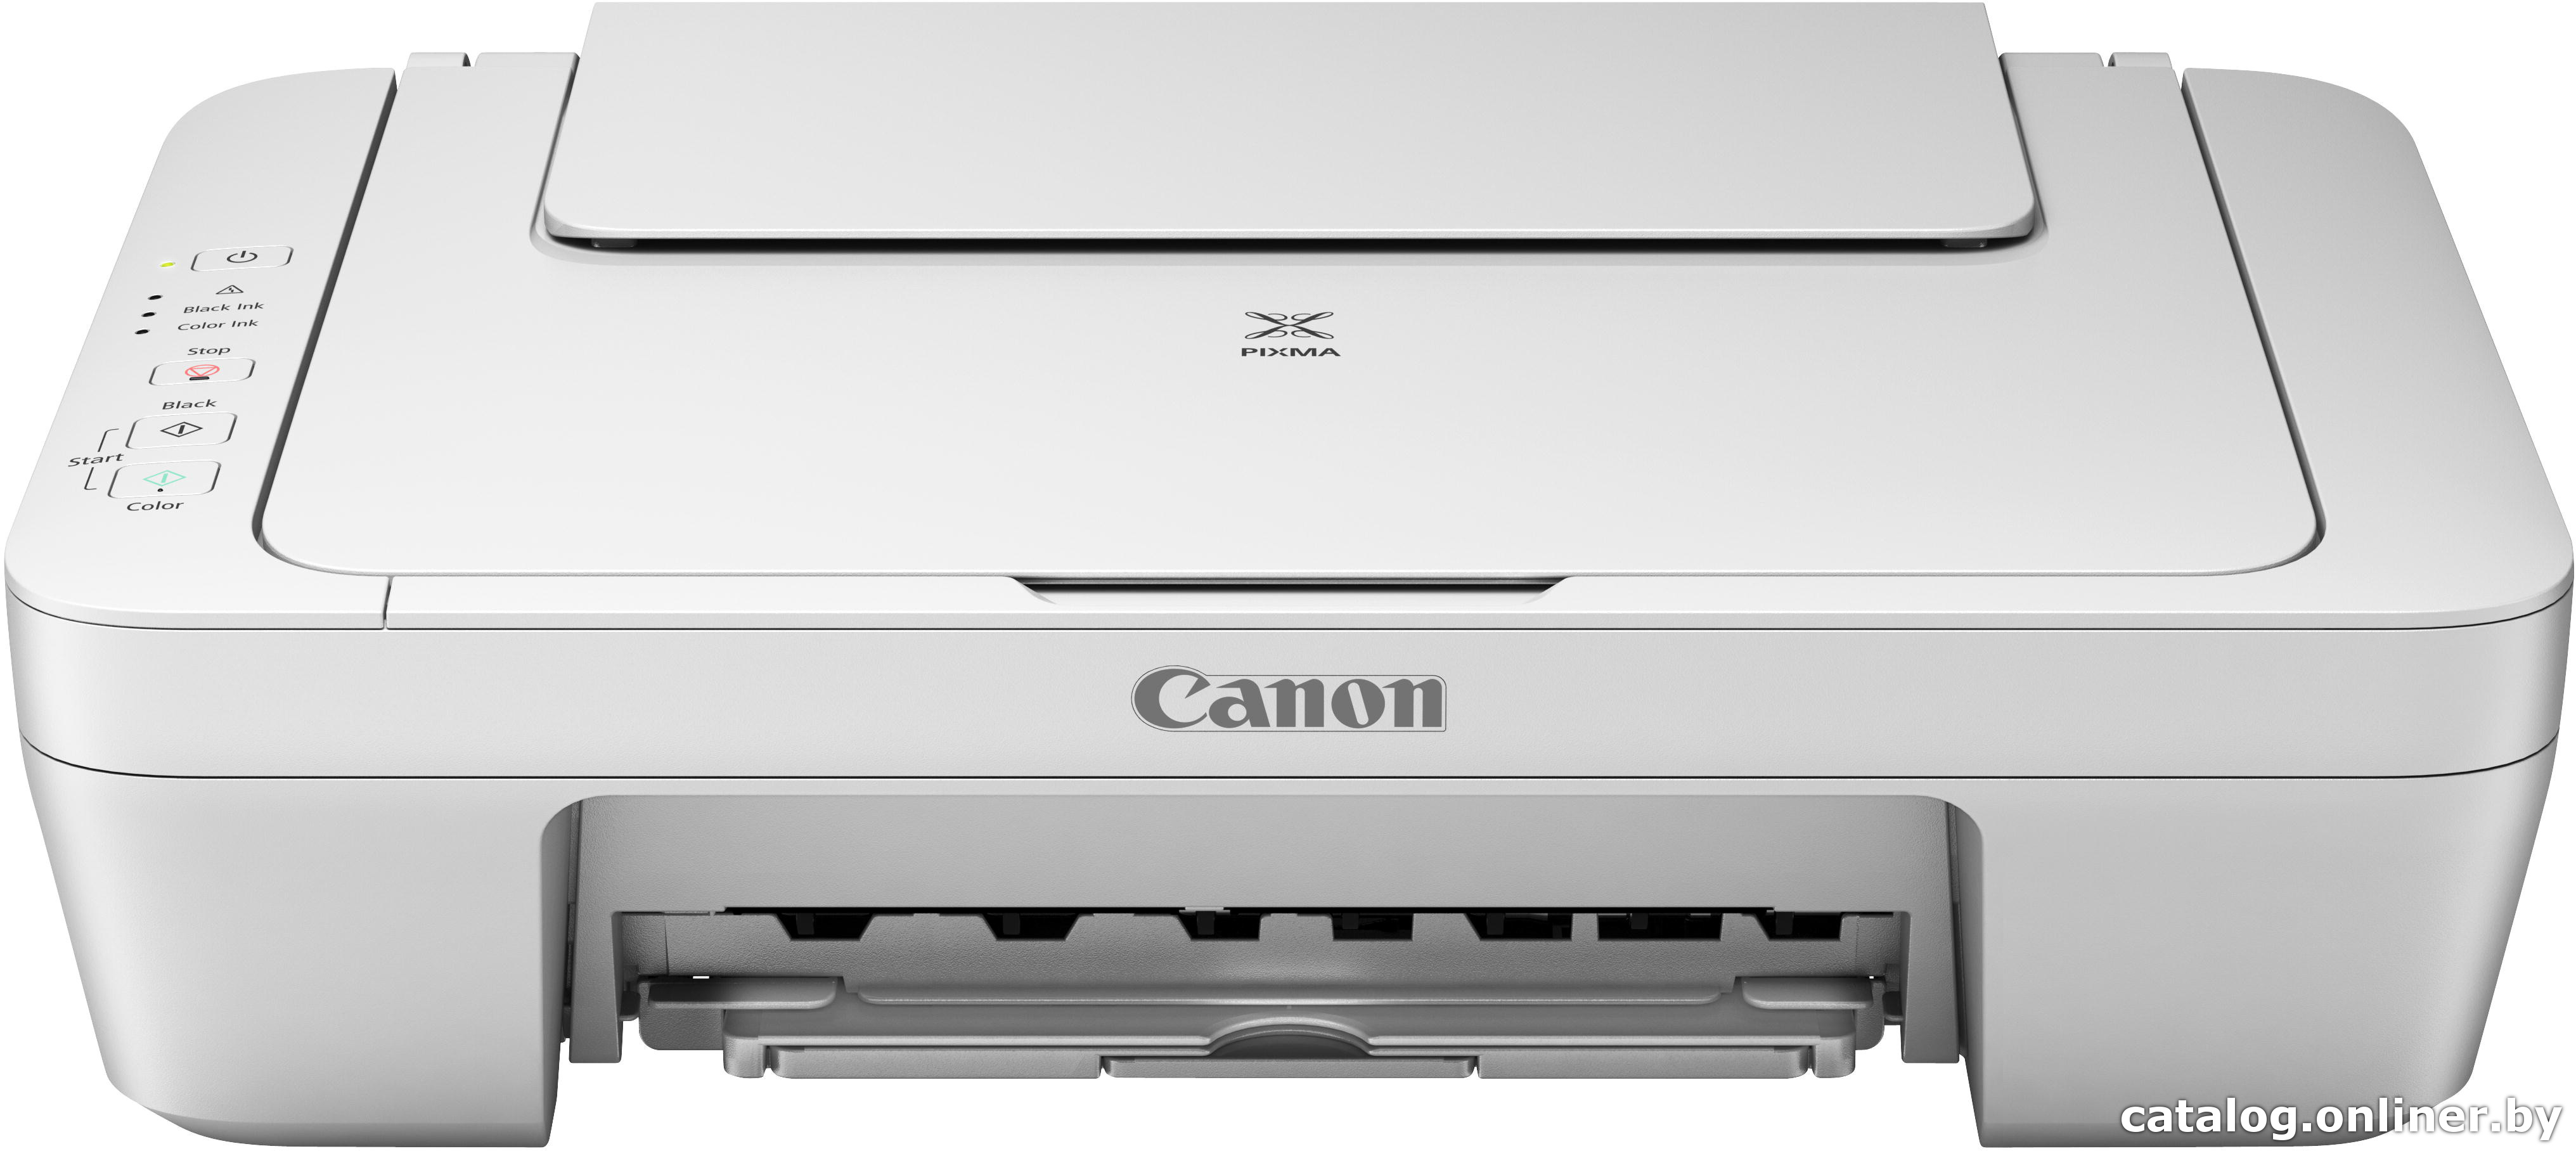 Canon MG2540S Scanner Driver Mac Sierra 10.12 How to Download and Install - Featured